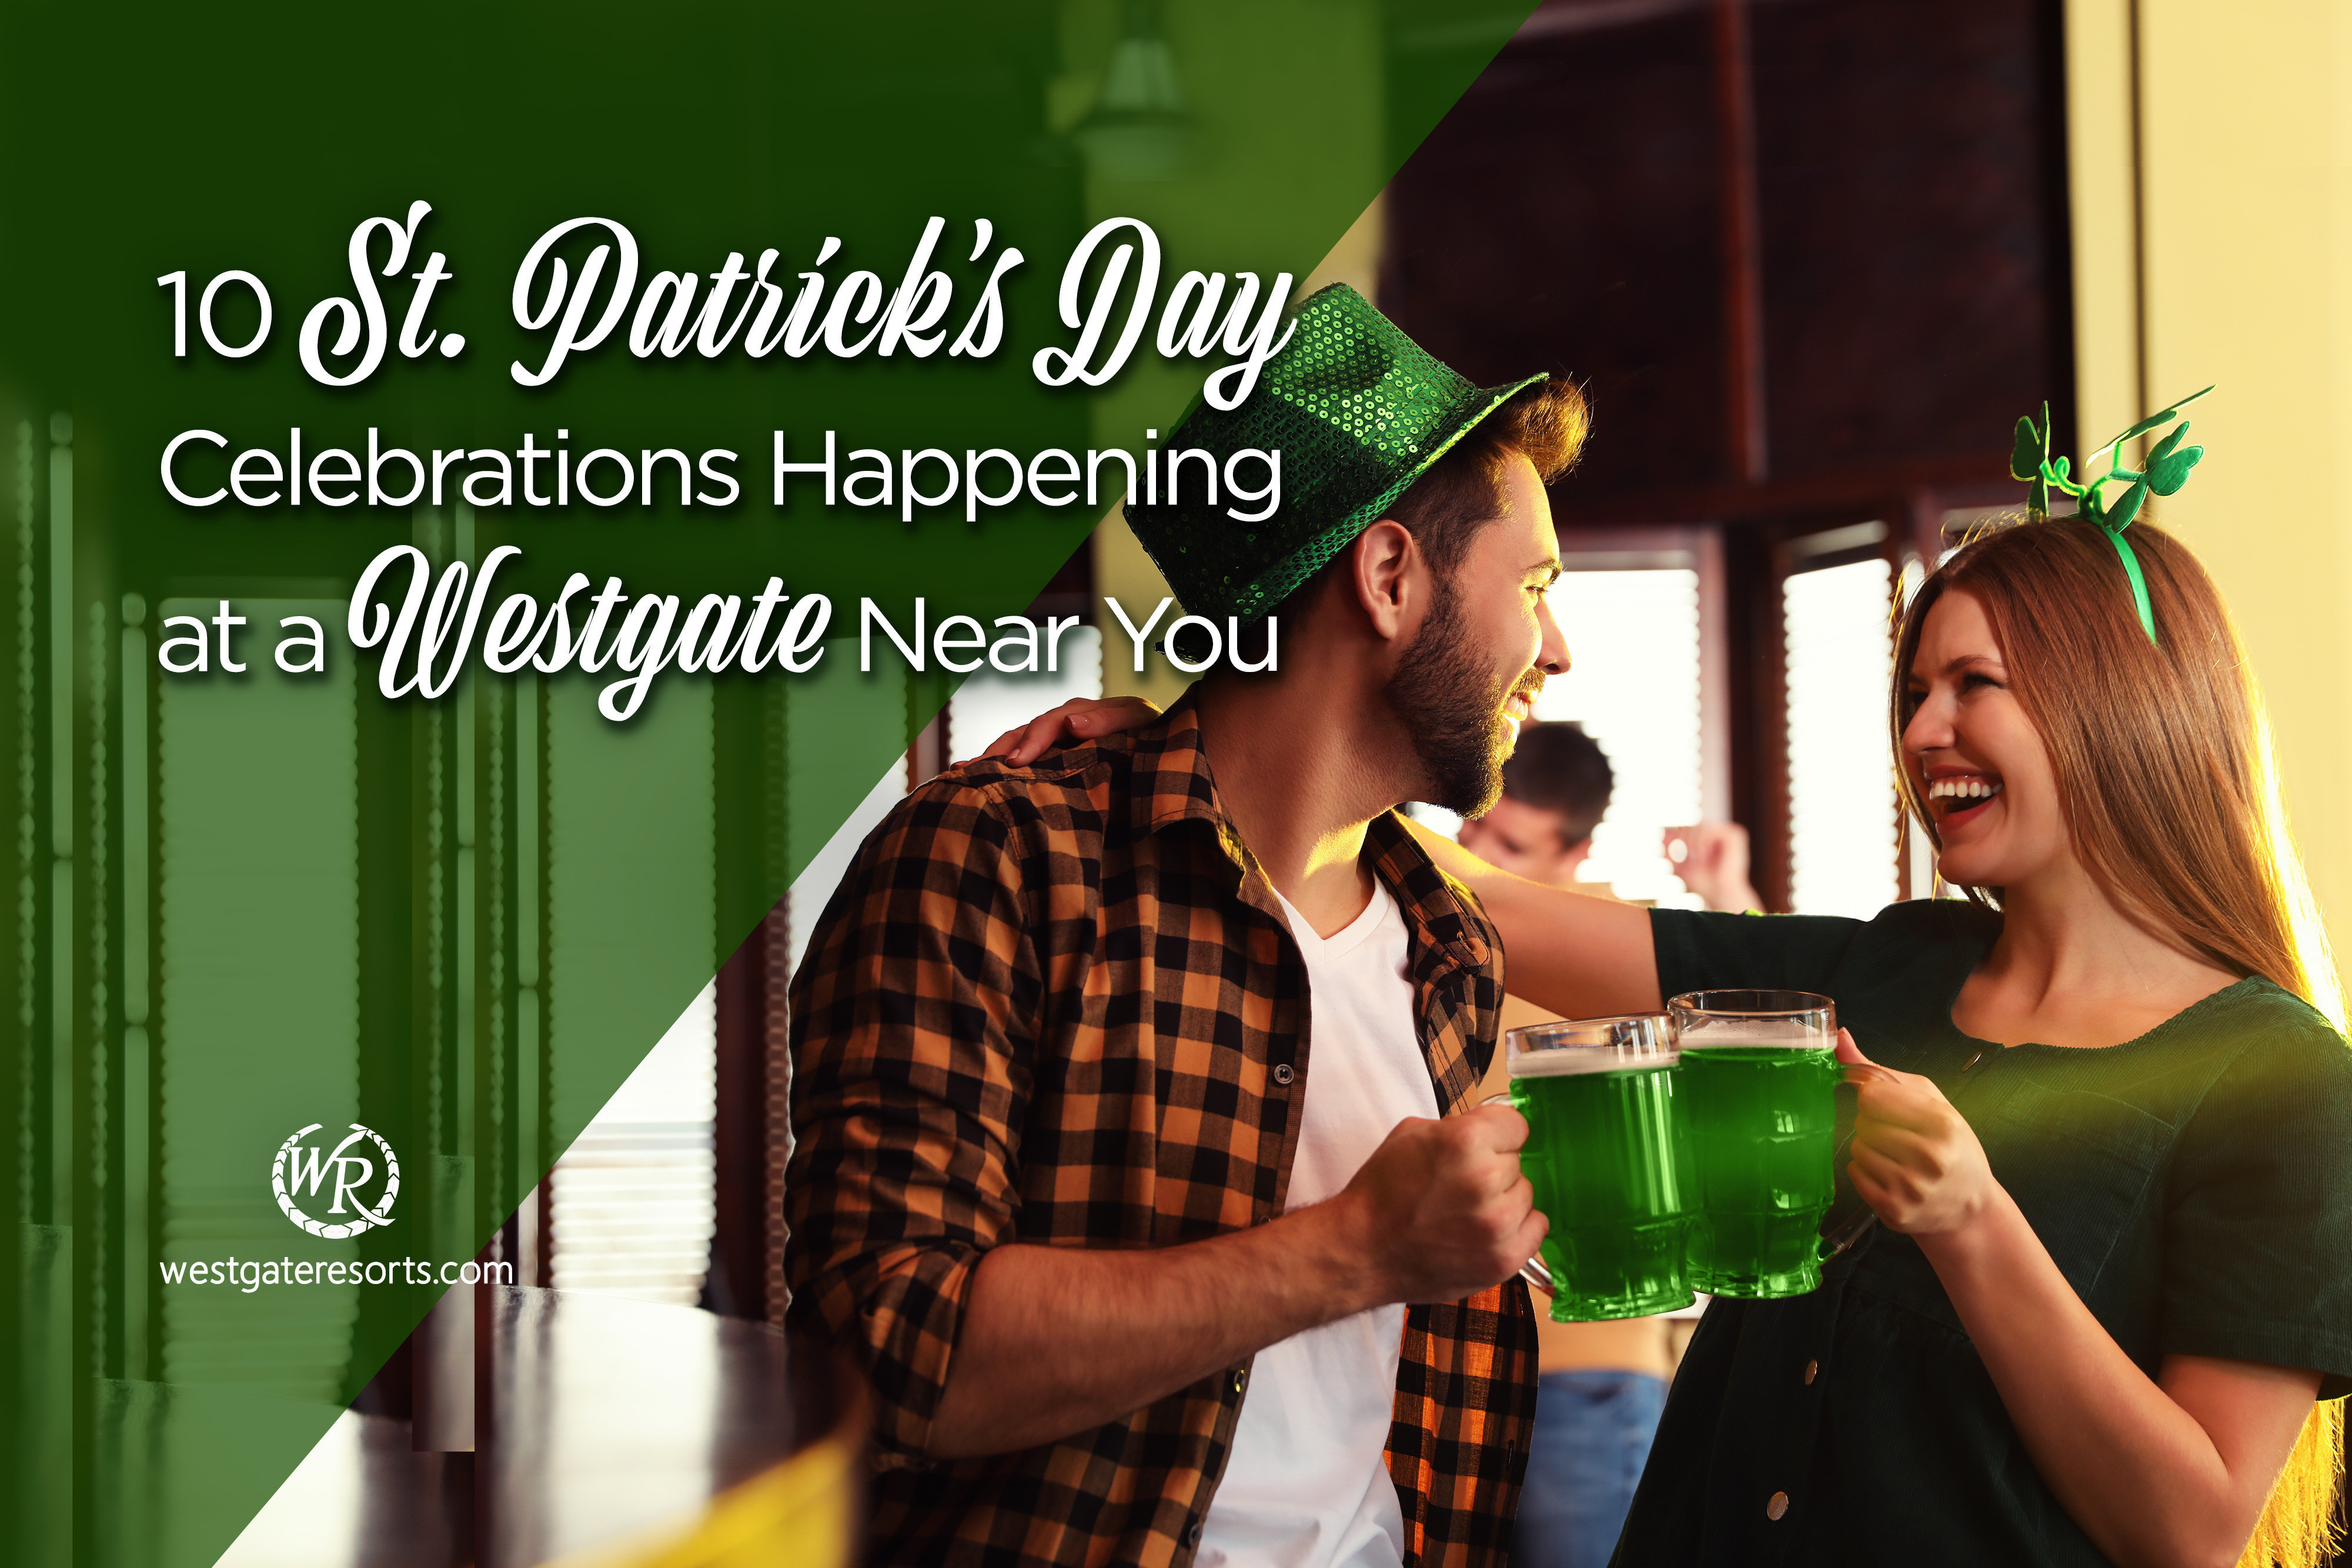 10 St. Patrick's Day Celebrations Happening at a Westgate Near You